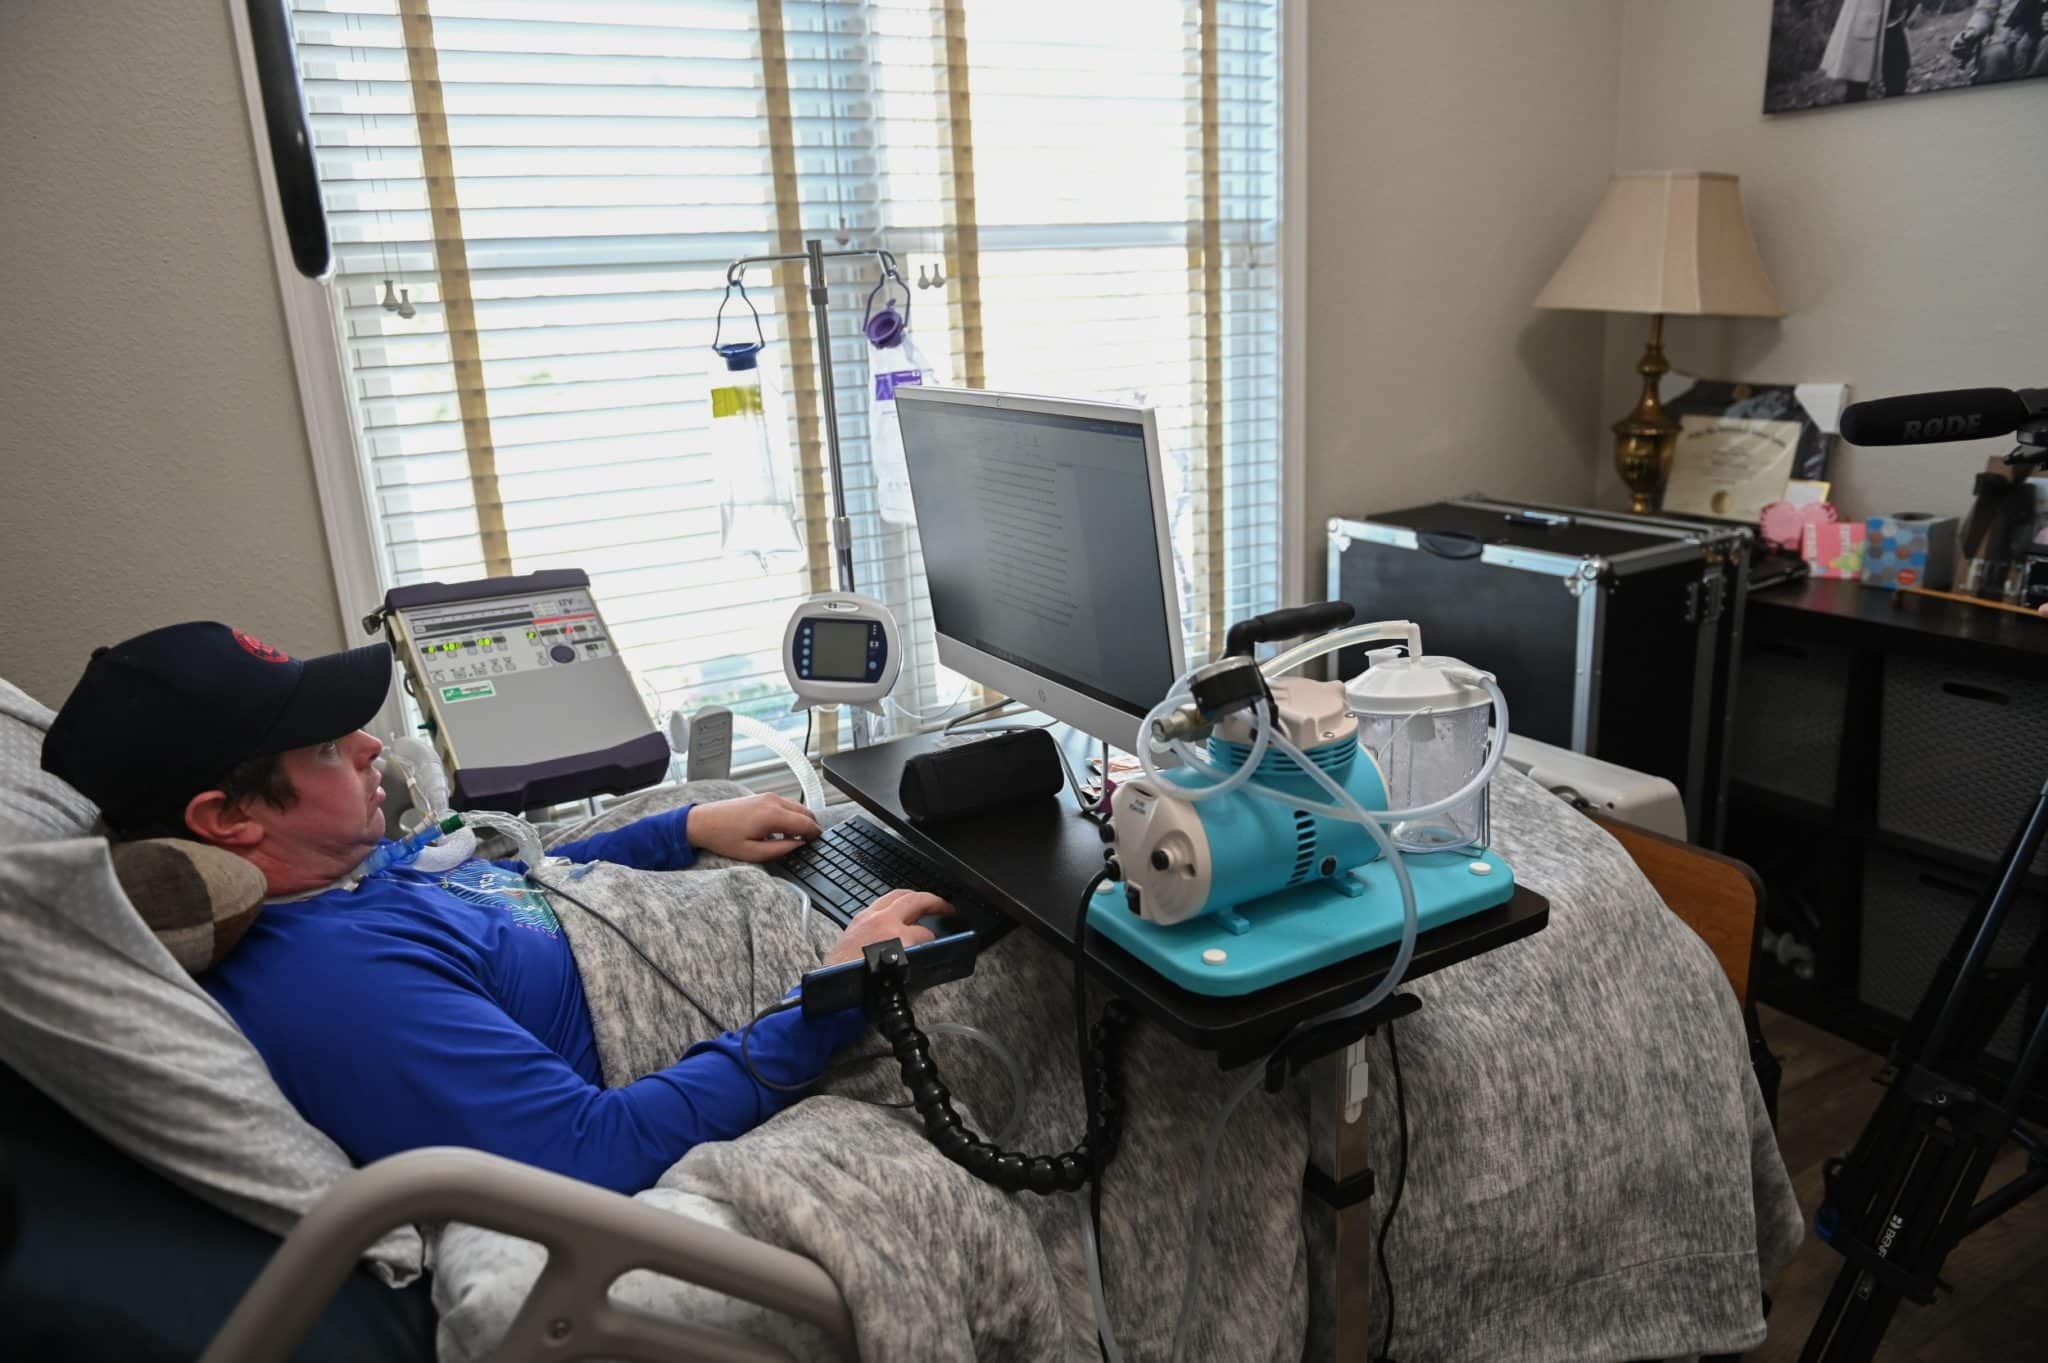 Person with ALS in bed with computer